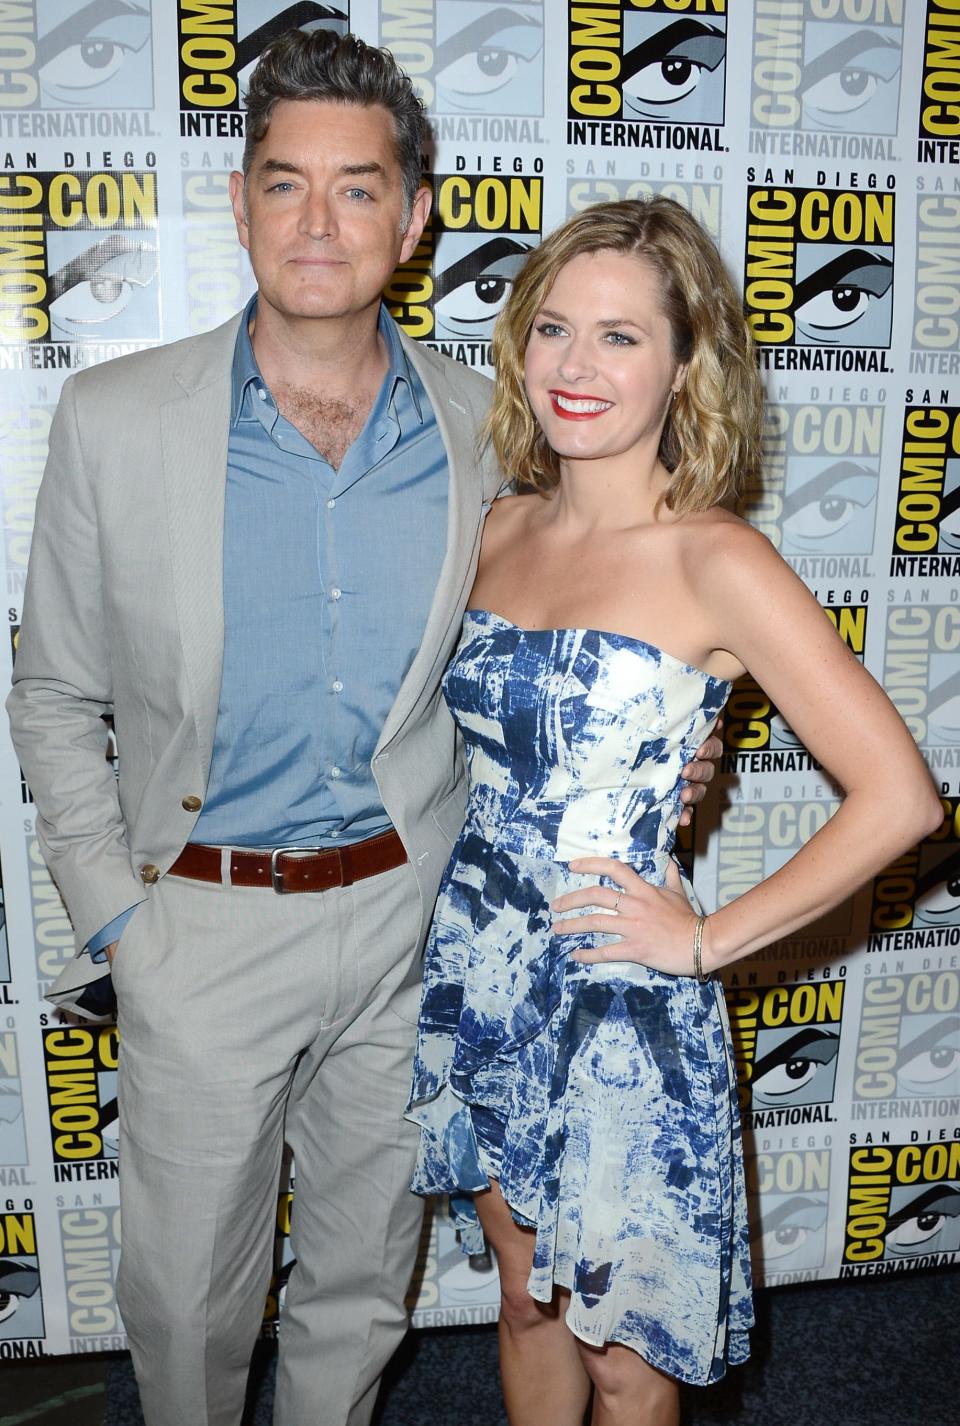 Actors Timothy Omundson and Maggie Lawson attend USA Network's "Psych" during Comic-Con International held at the Hilton San Diego Bayfront Hotel on July 12, 2012 in San Diego, California.